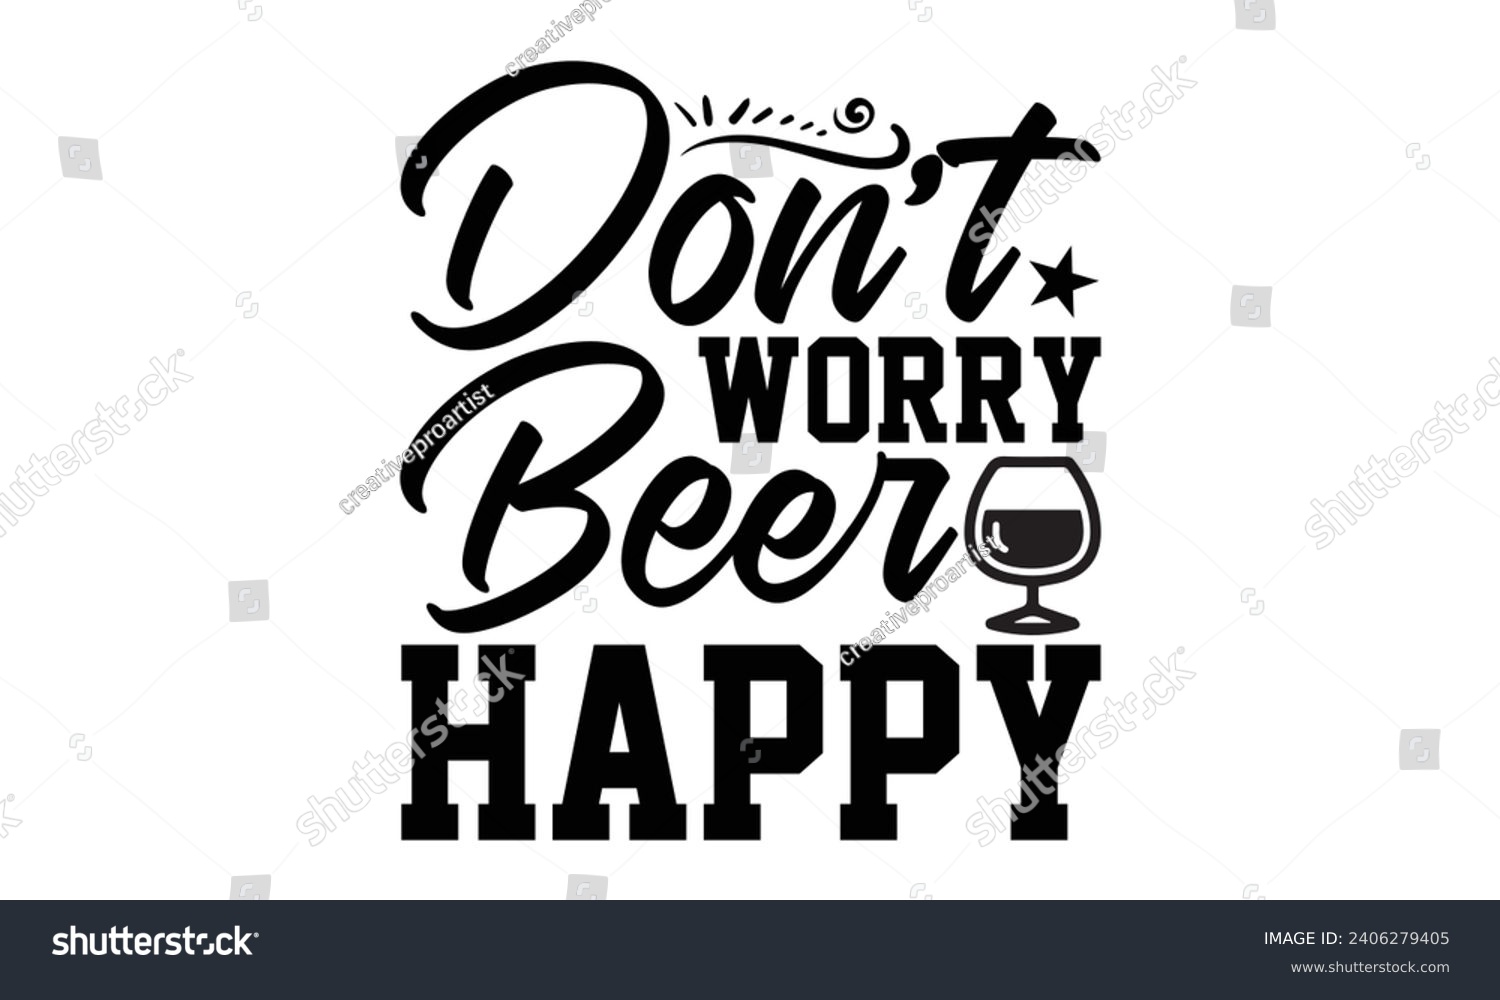 SVG of Don’t Worry Beer Happy- Beer t- shirt design, Handmade calligraphy vector illustration for Cutting Machine, Silhouette Cameo, Cricut, Vector illustration Template. svg